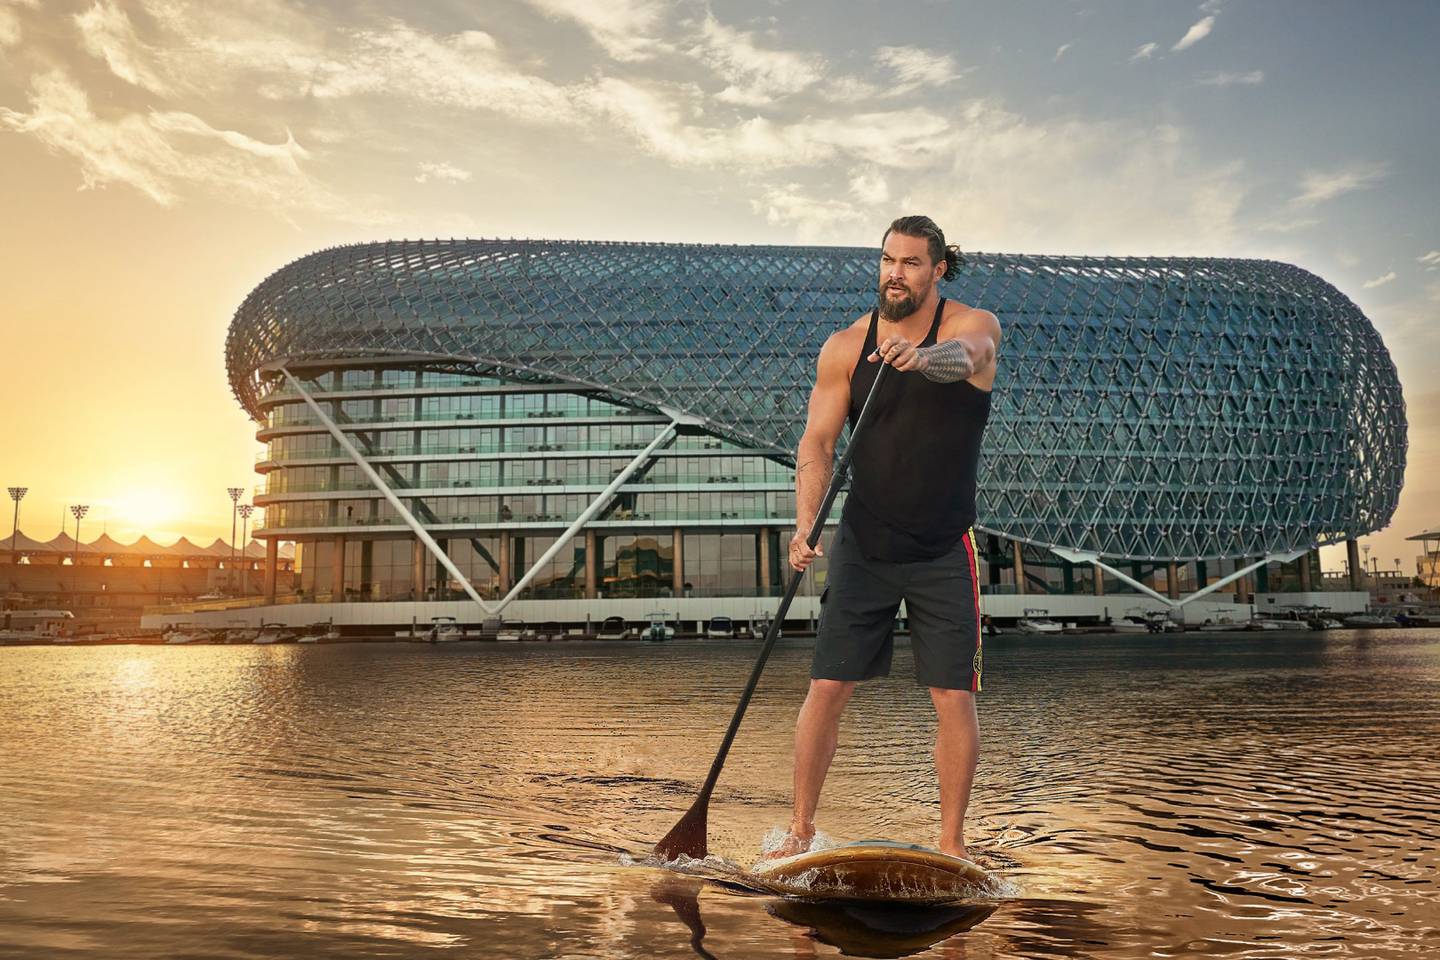 Hollywood sensation Jason Momoa paddles his way to Yas Island as the new Chief Island Officer